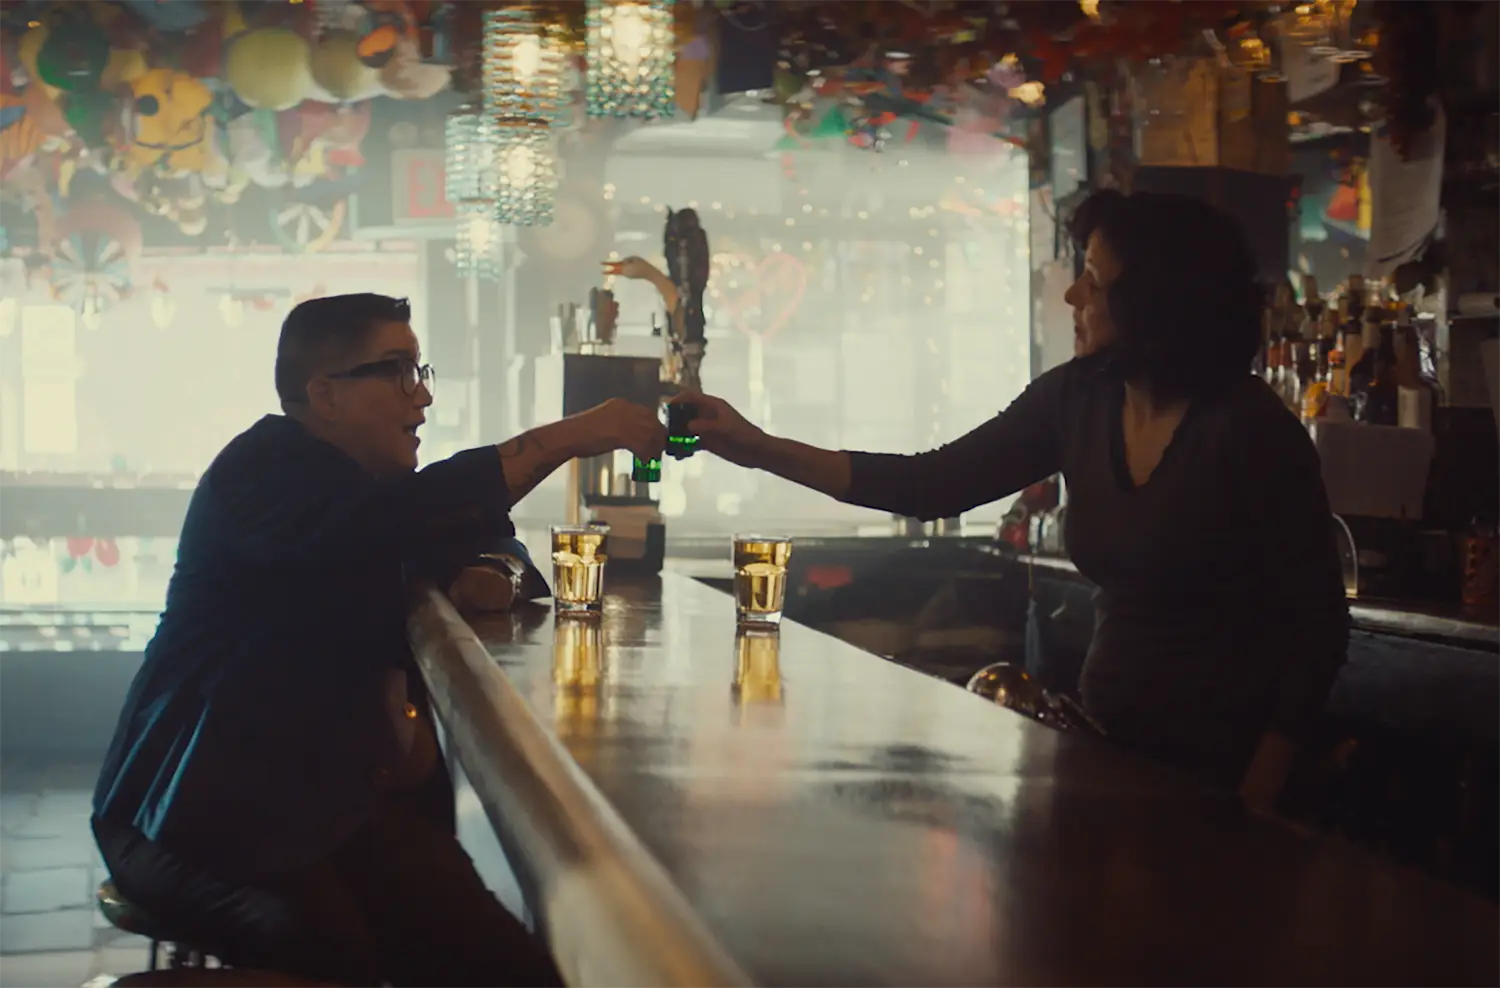 Lea DeLaria and Cubby Hole owner Lisa Menichino clink shot glasses together in the colorfully and eclectically decorated lesbian bar Cubby Hole.